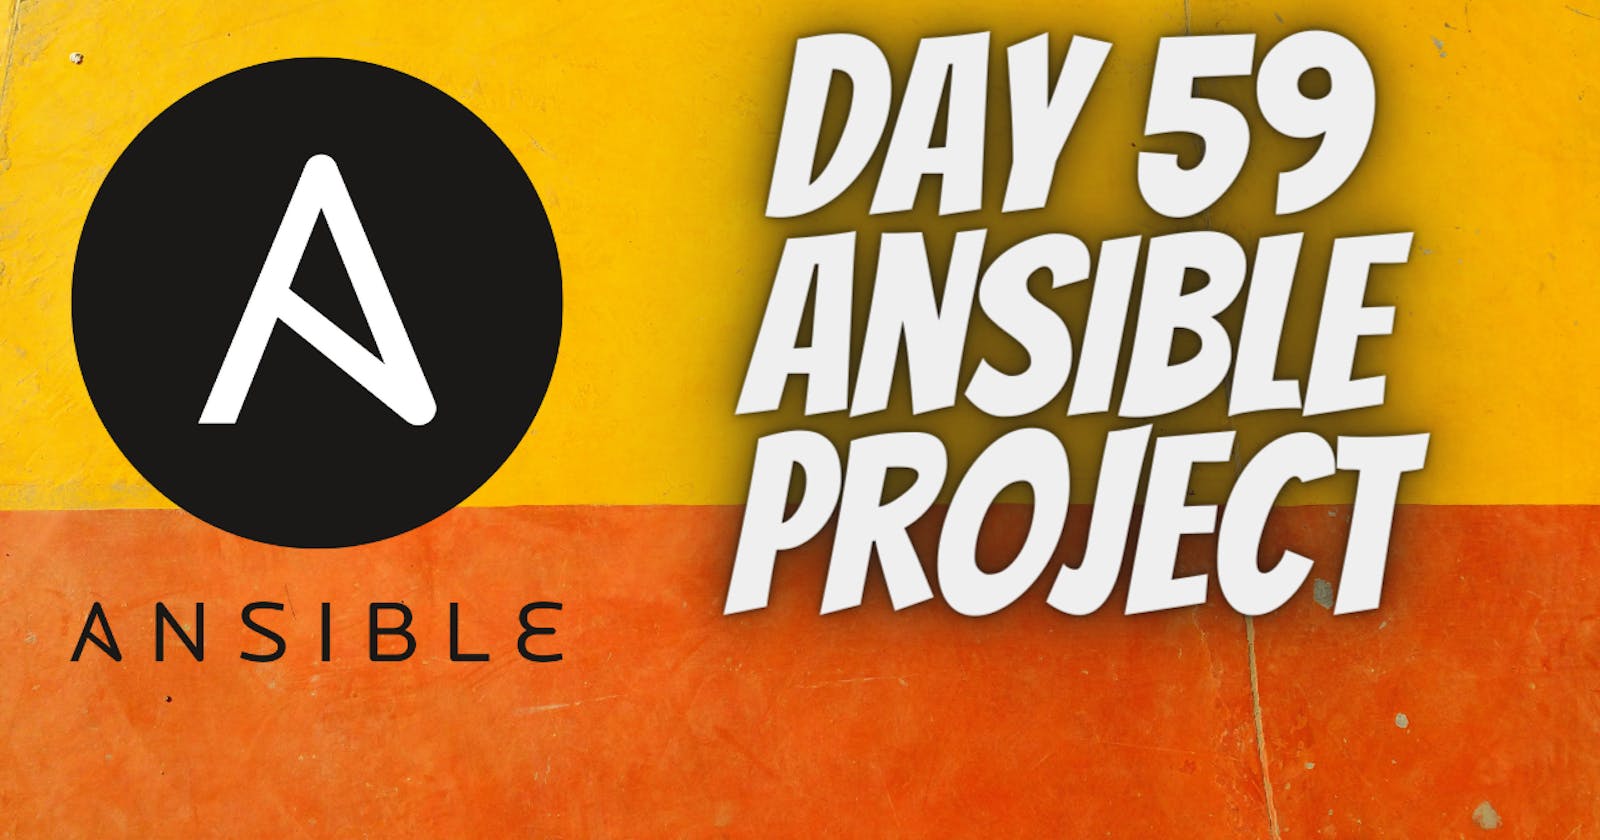 🚀 Ansible Project 🔥